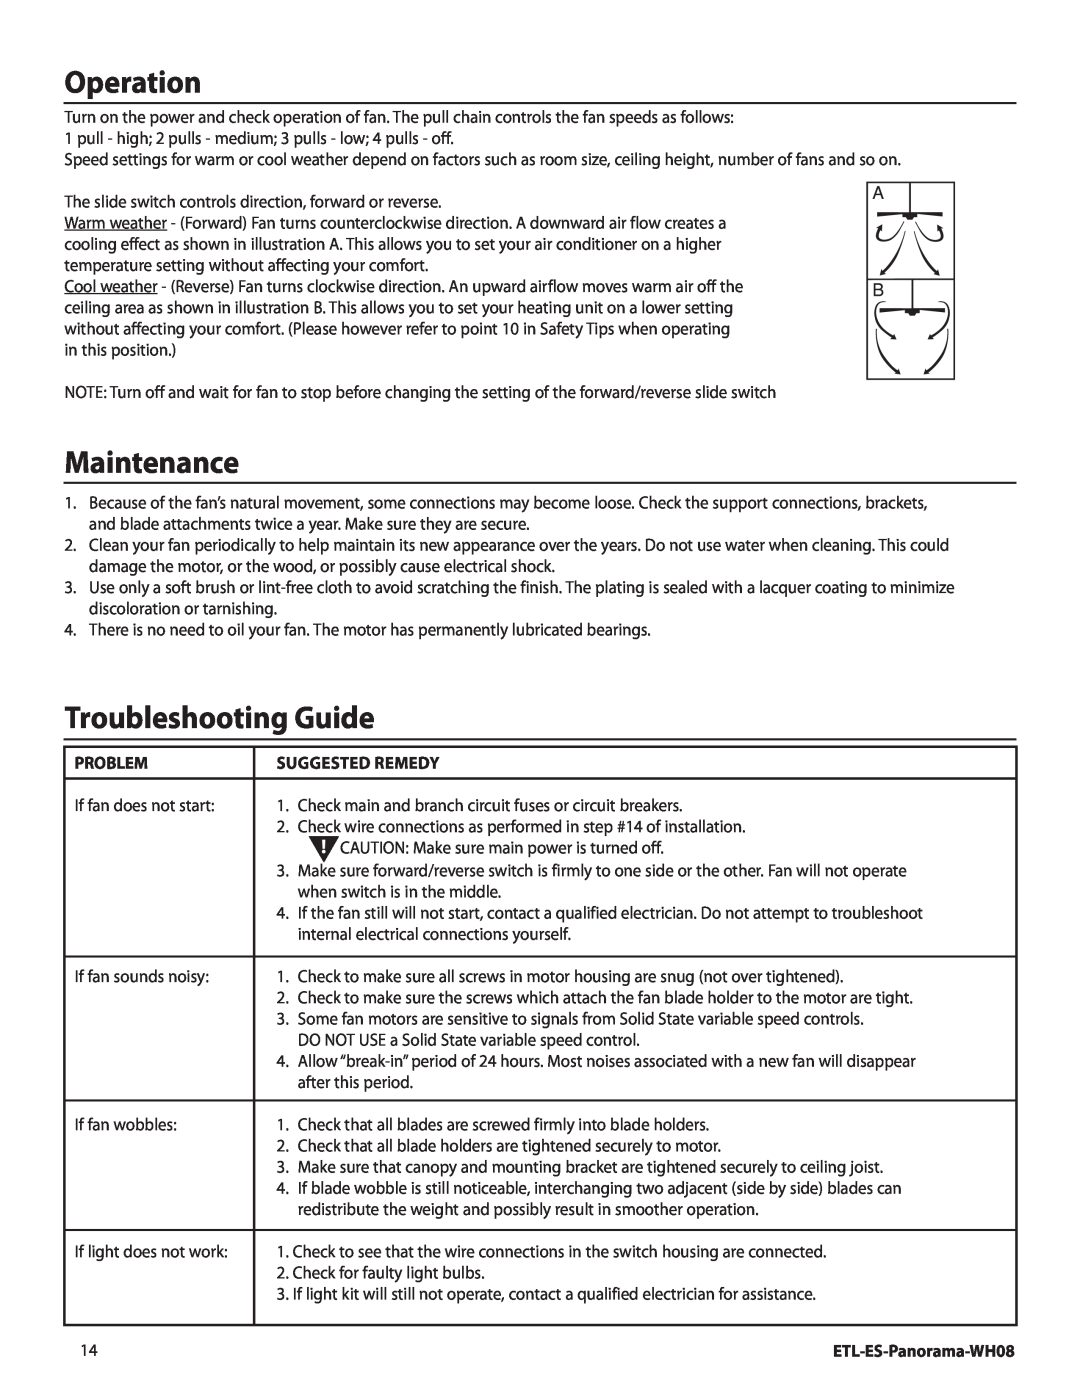 Westinghouse WH08 installation instructions Operation, Maintenance, Troubleshooting Guide, Problem, Suggested Remedy 